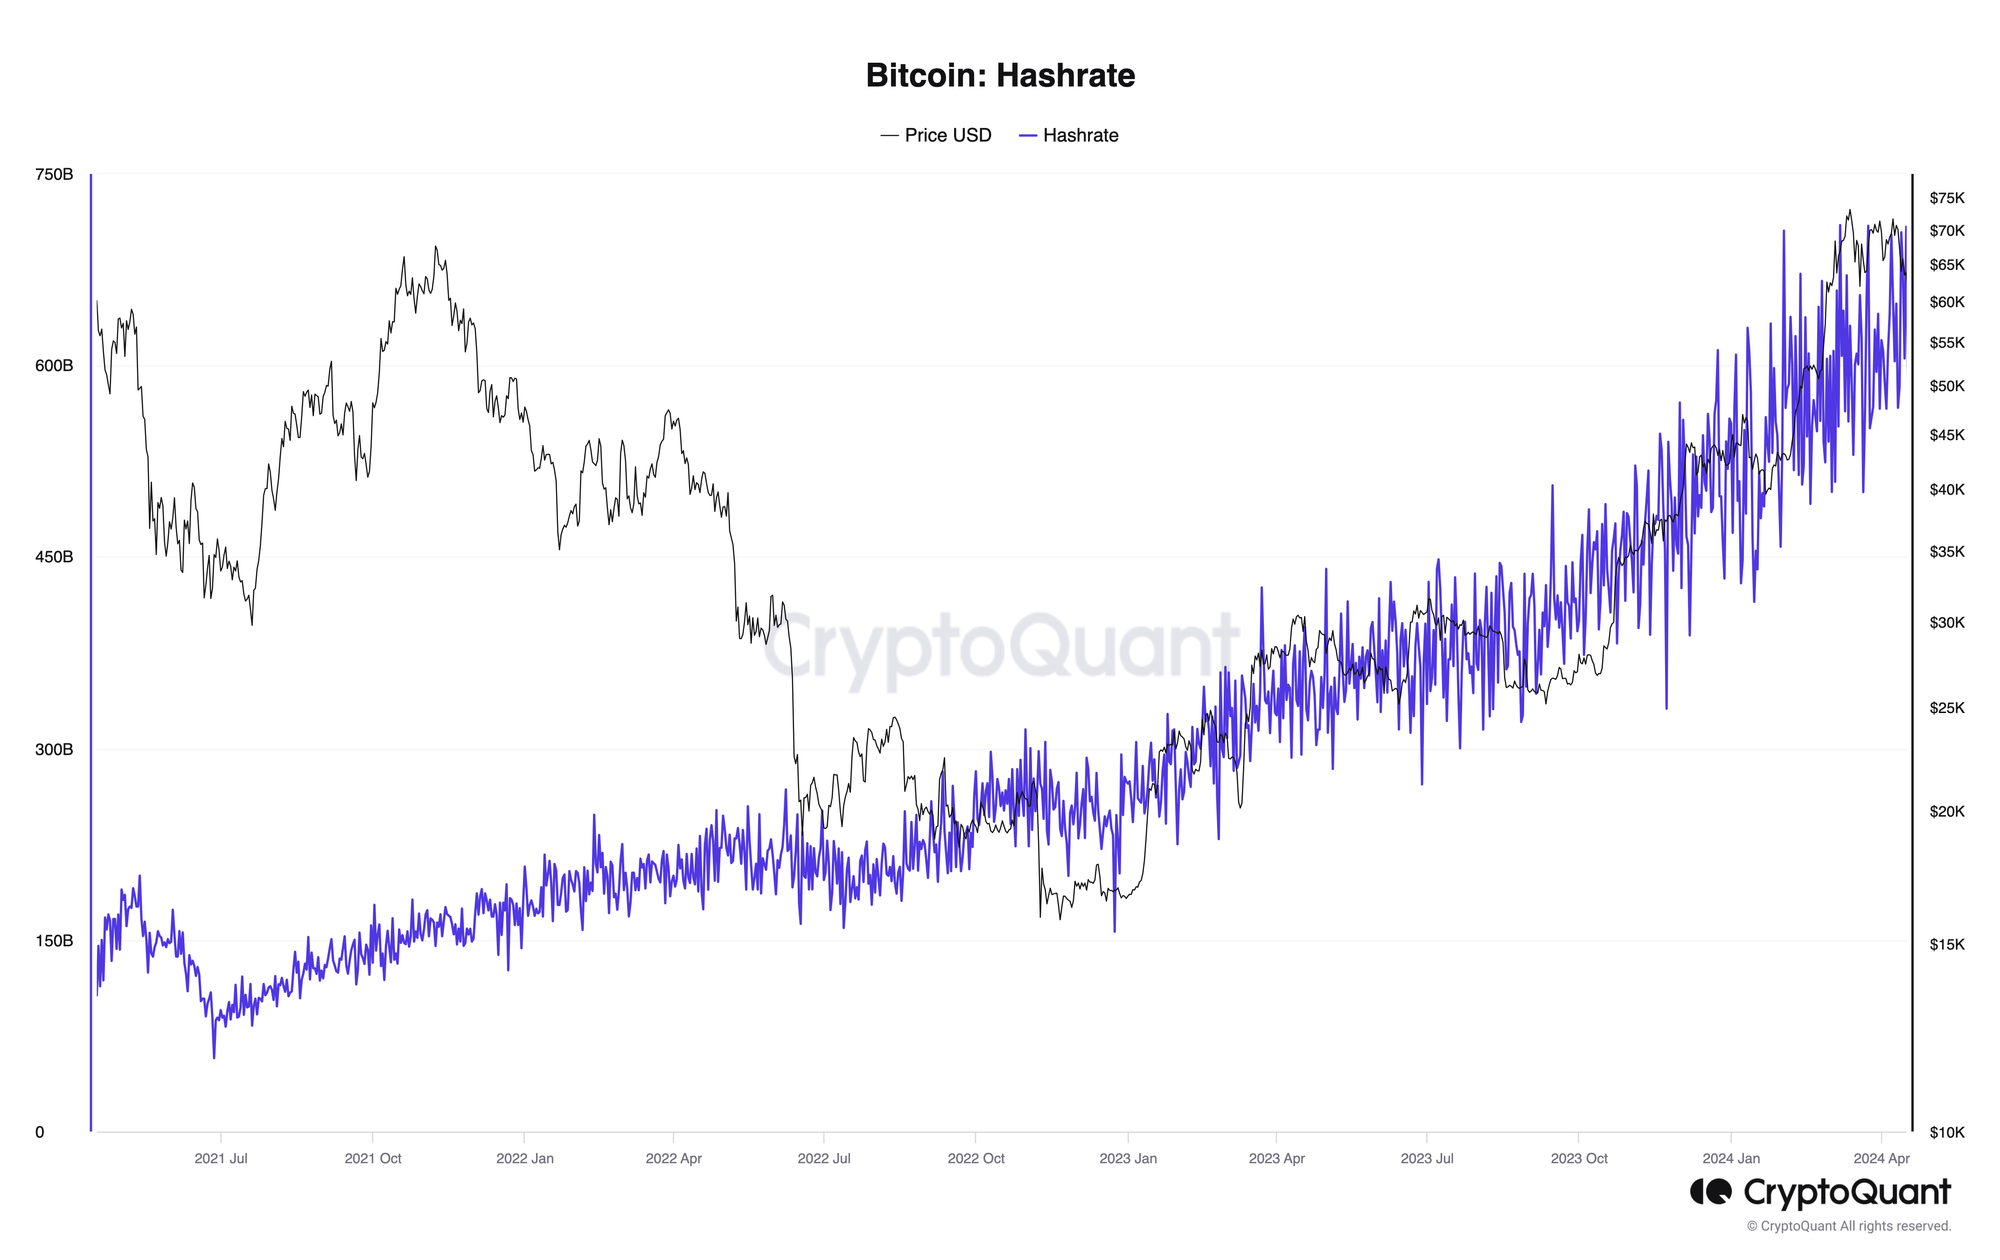 Hashrate and the price of bitcoin